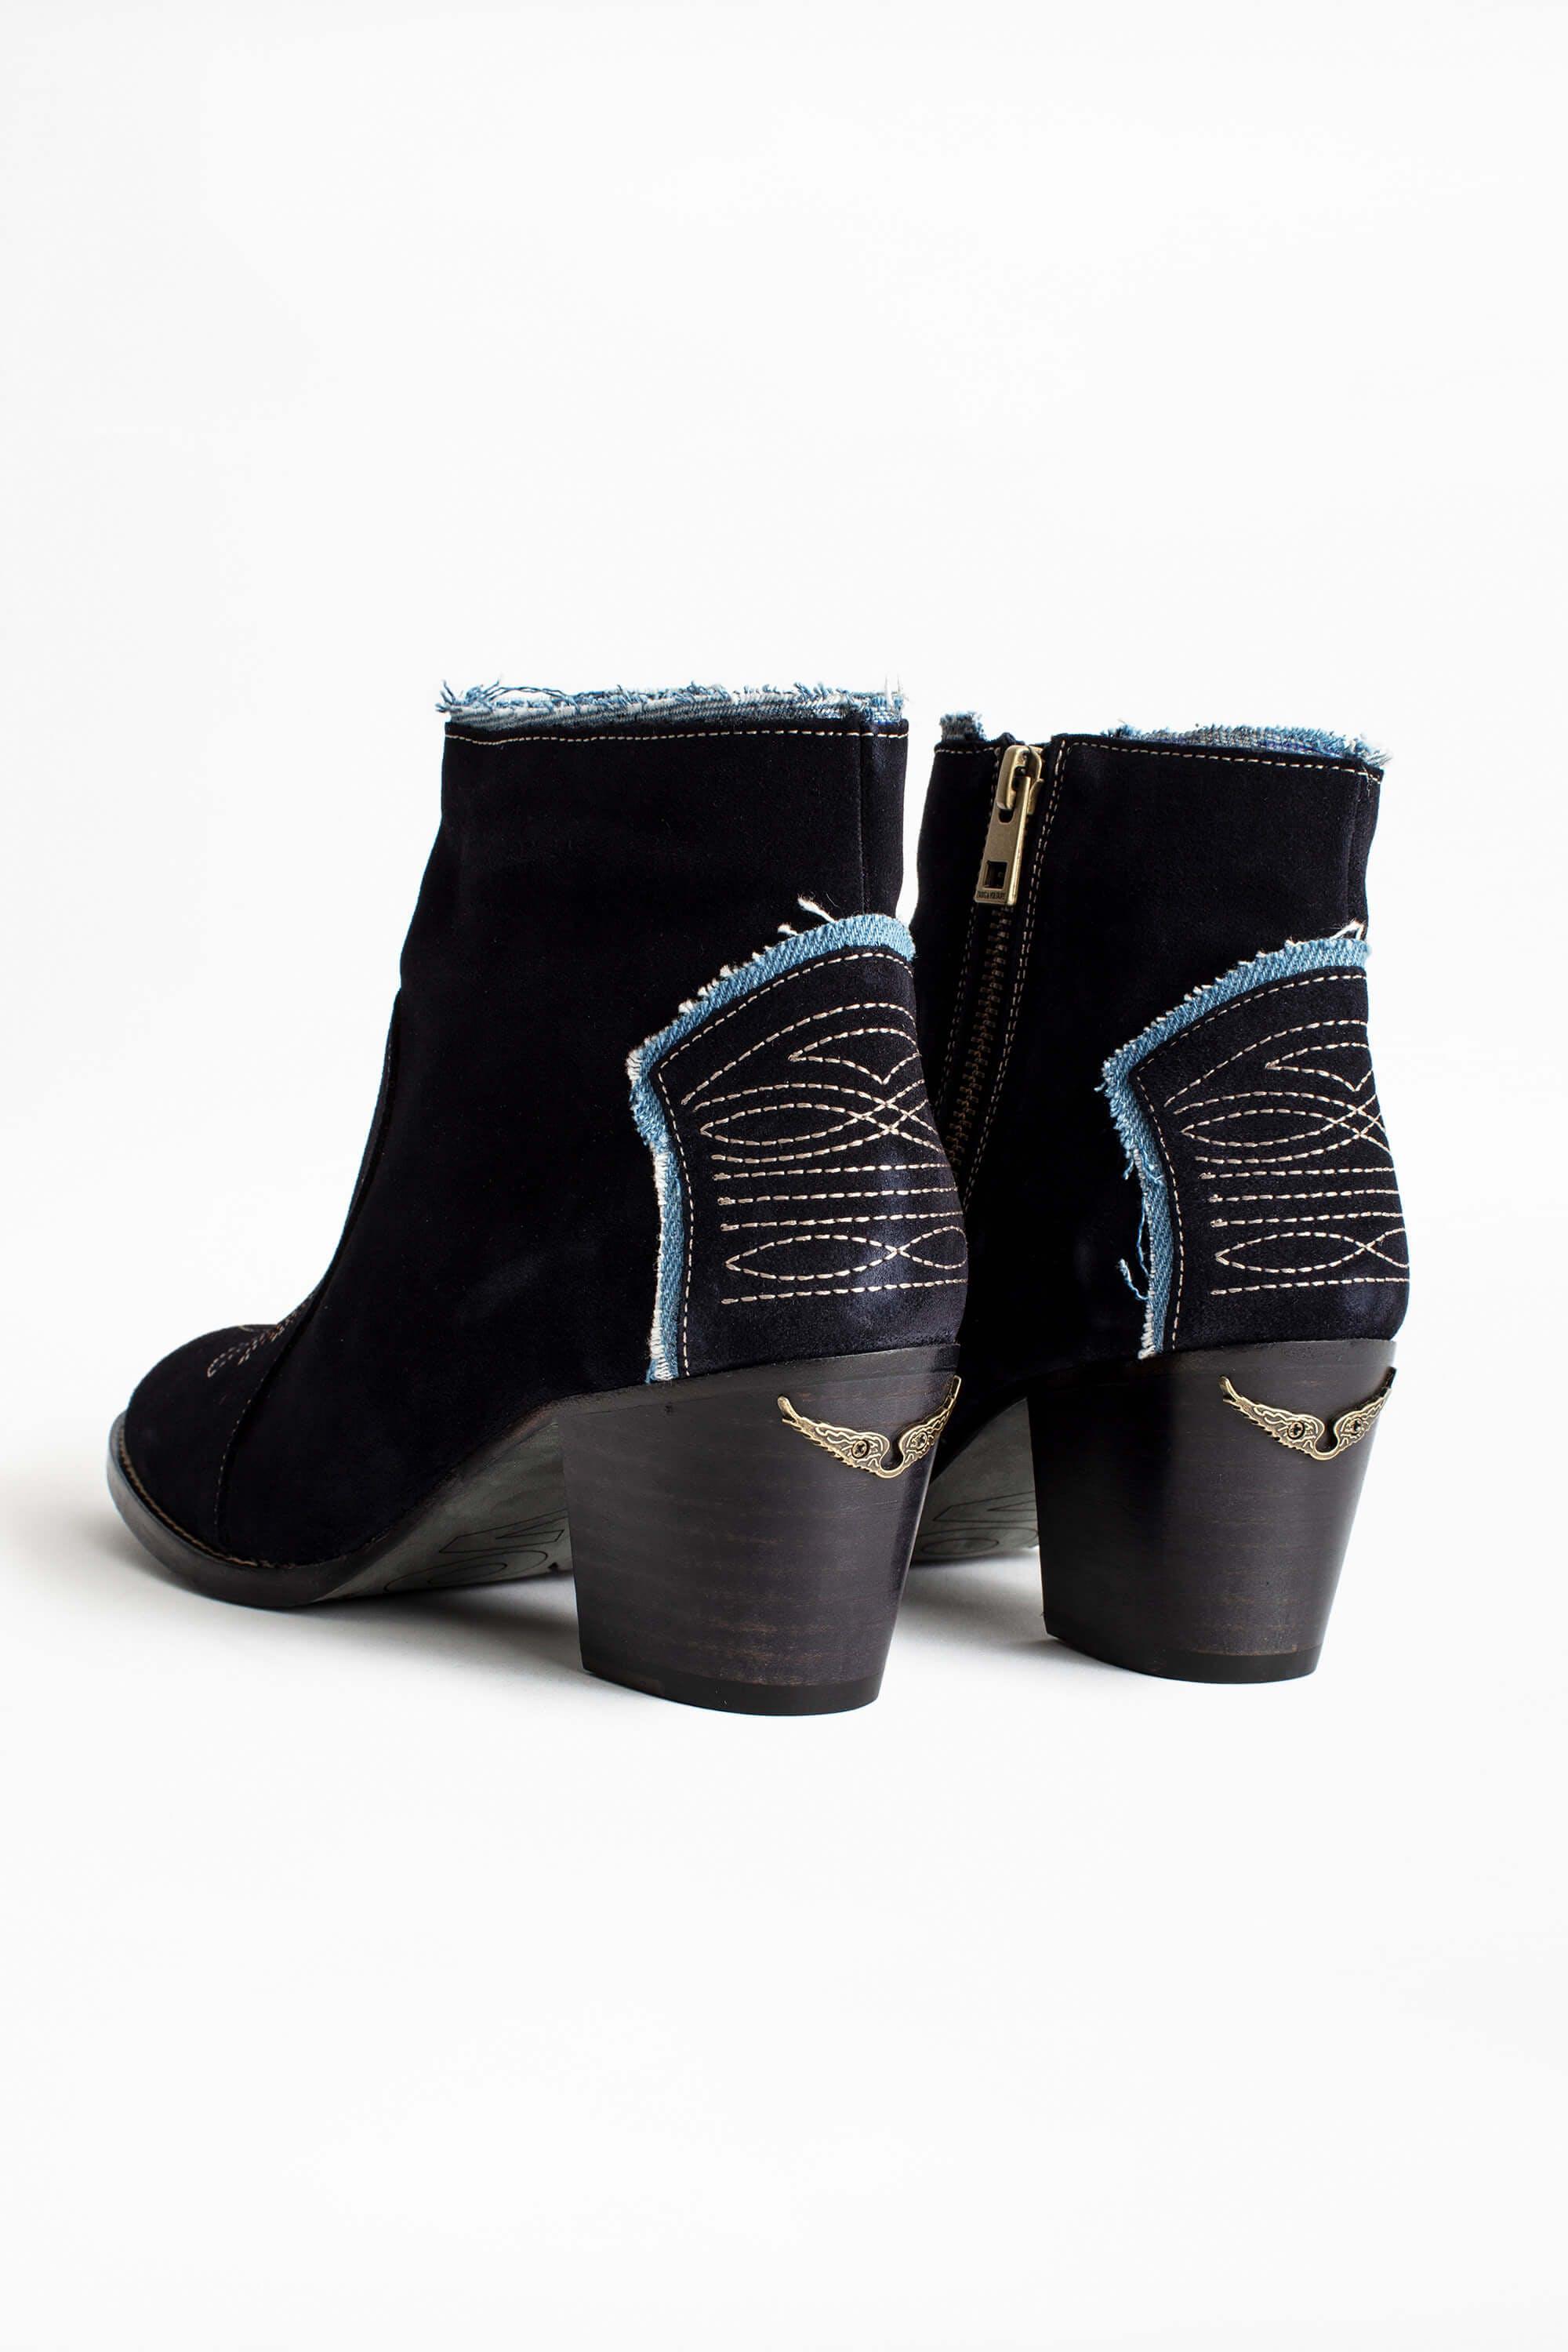 Zadig & Voltaire Molly Suede Denim Ankle Boots in Blue | Lyst